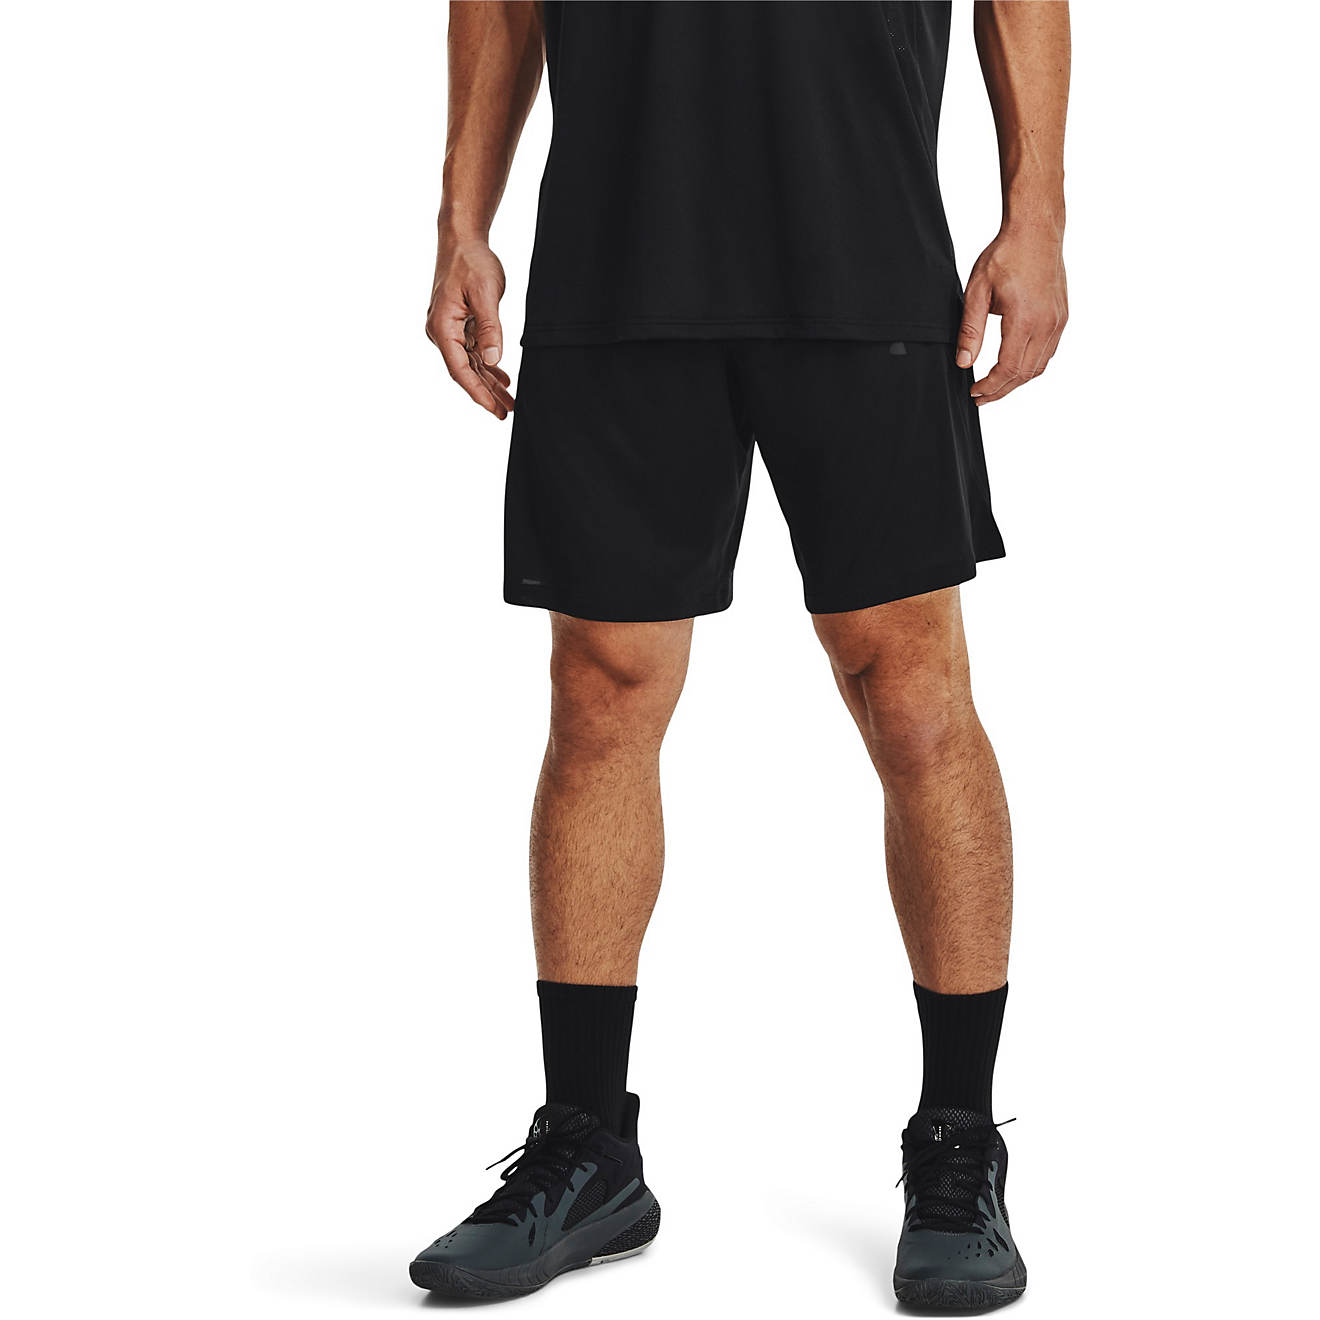 Under Armour Men's Baseline Shorts 10 in